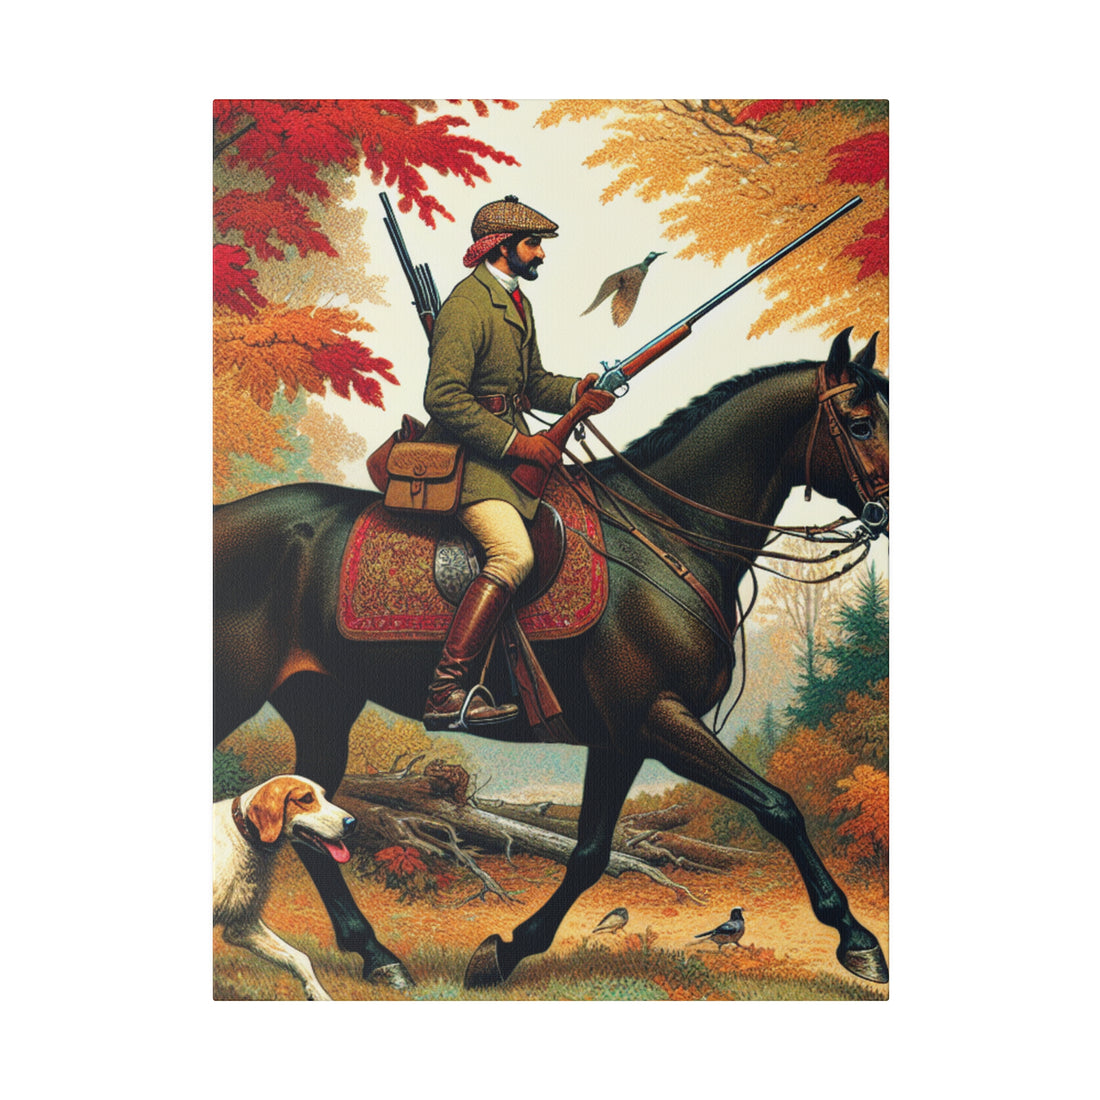 "Hunting Harmony: A Collector's Canvas Wall Art"